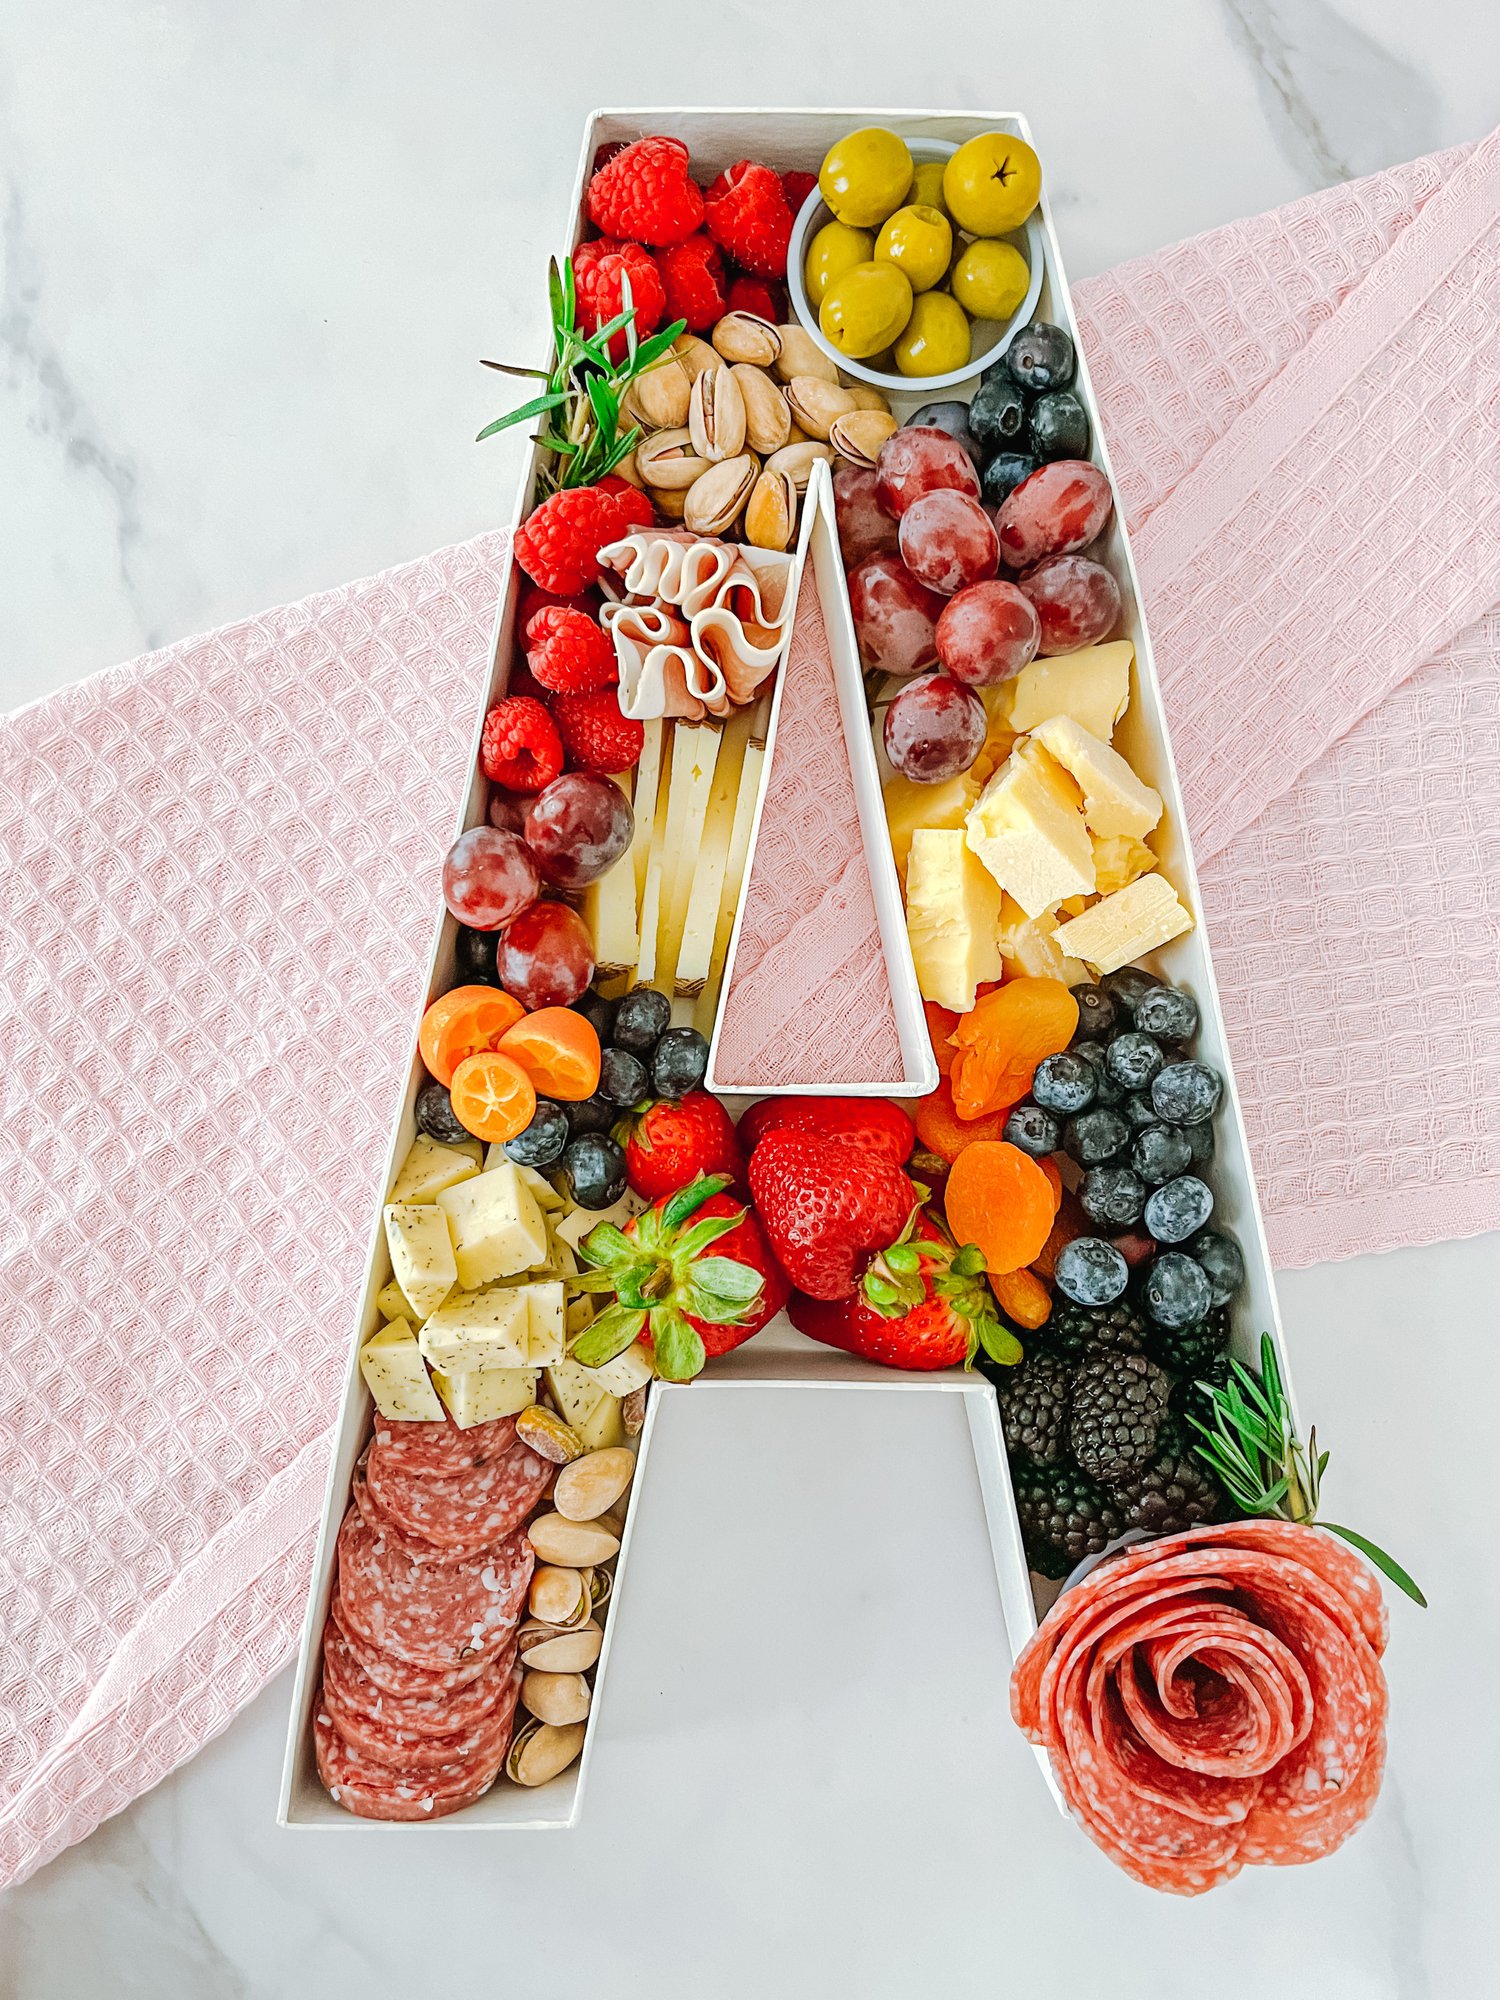 How to Style Charcuterie Letters! The cutest trend in grazing is here!  #charcuterieletters #cheese